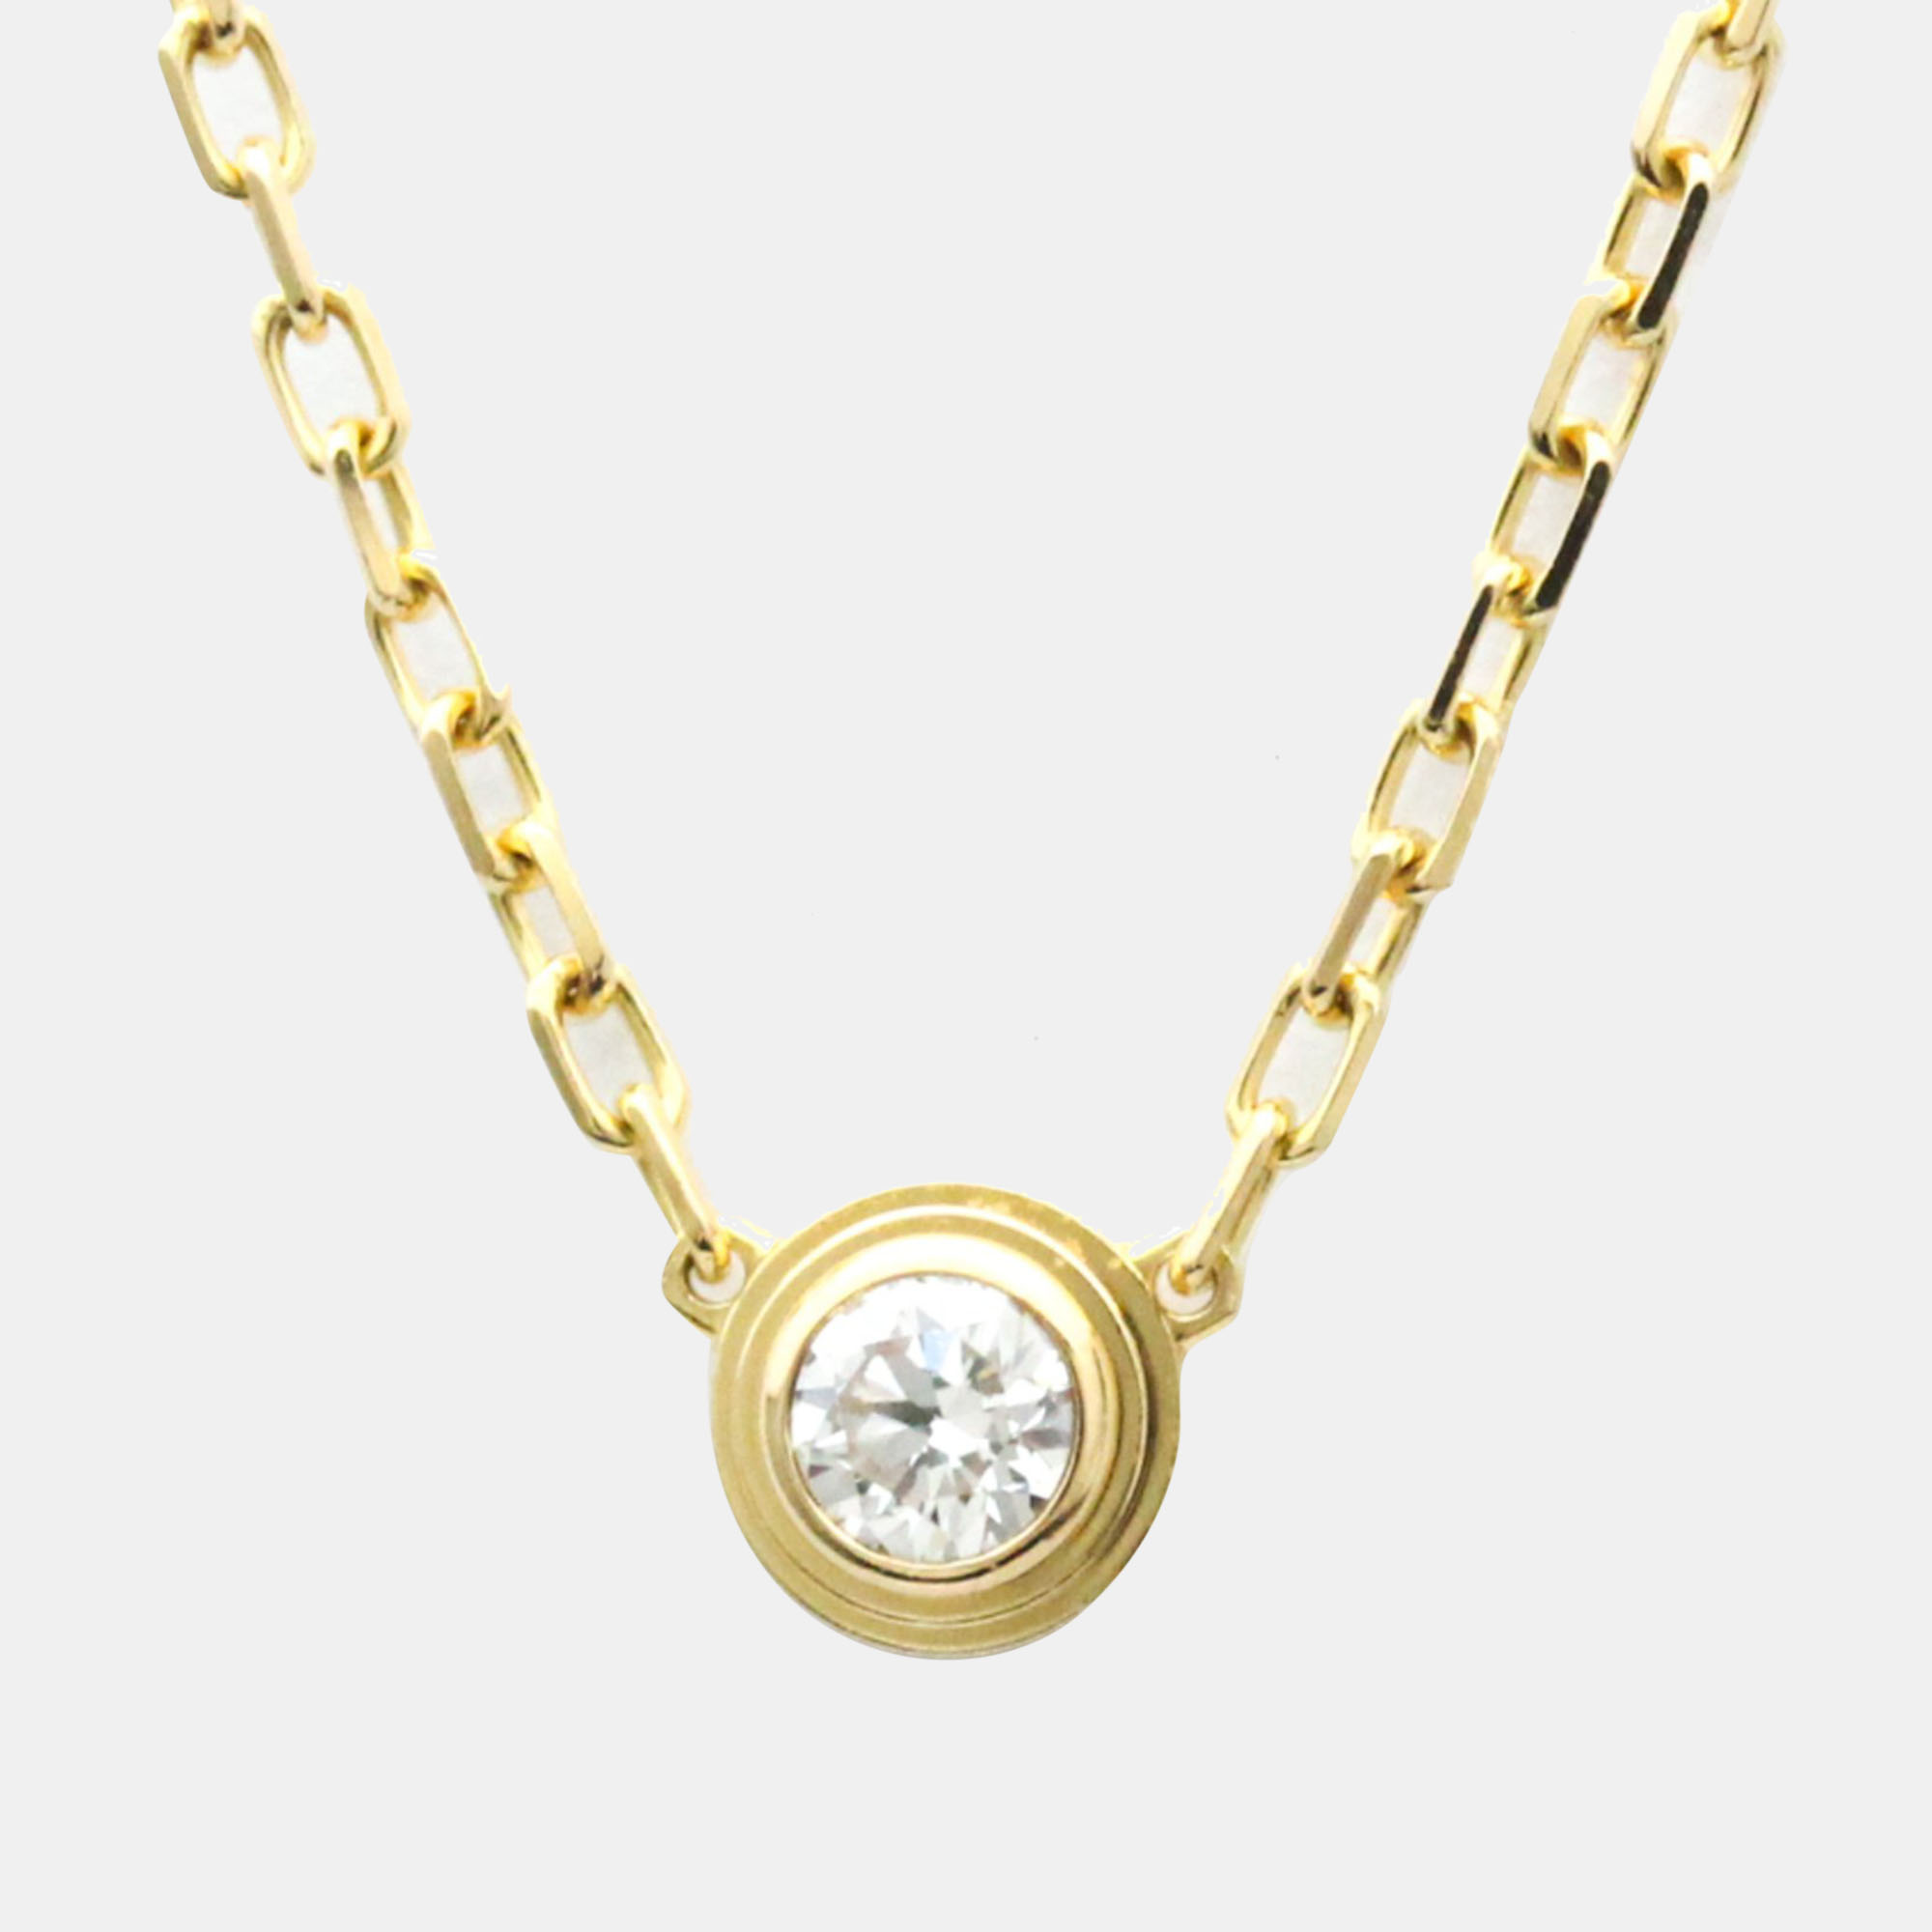 38393: Cartier 18k Yellow Gold Diamond Love Necklace, Box and Certific –  Paul Duggan Fine Watches